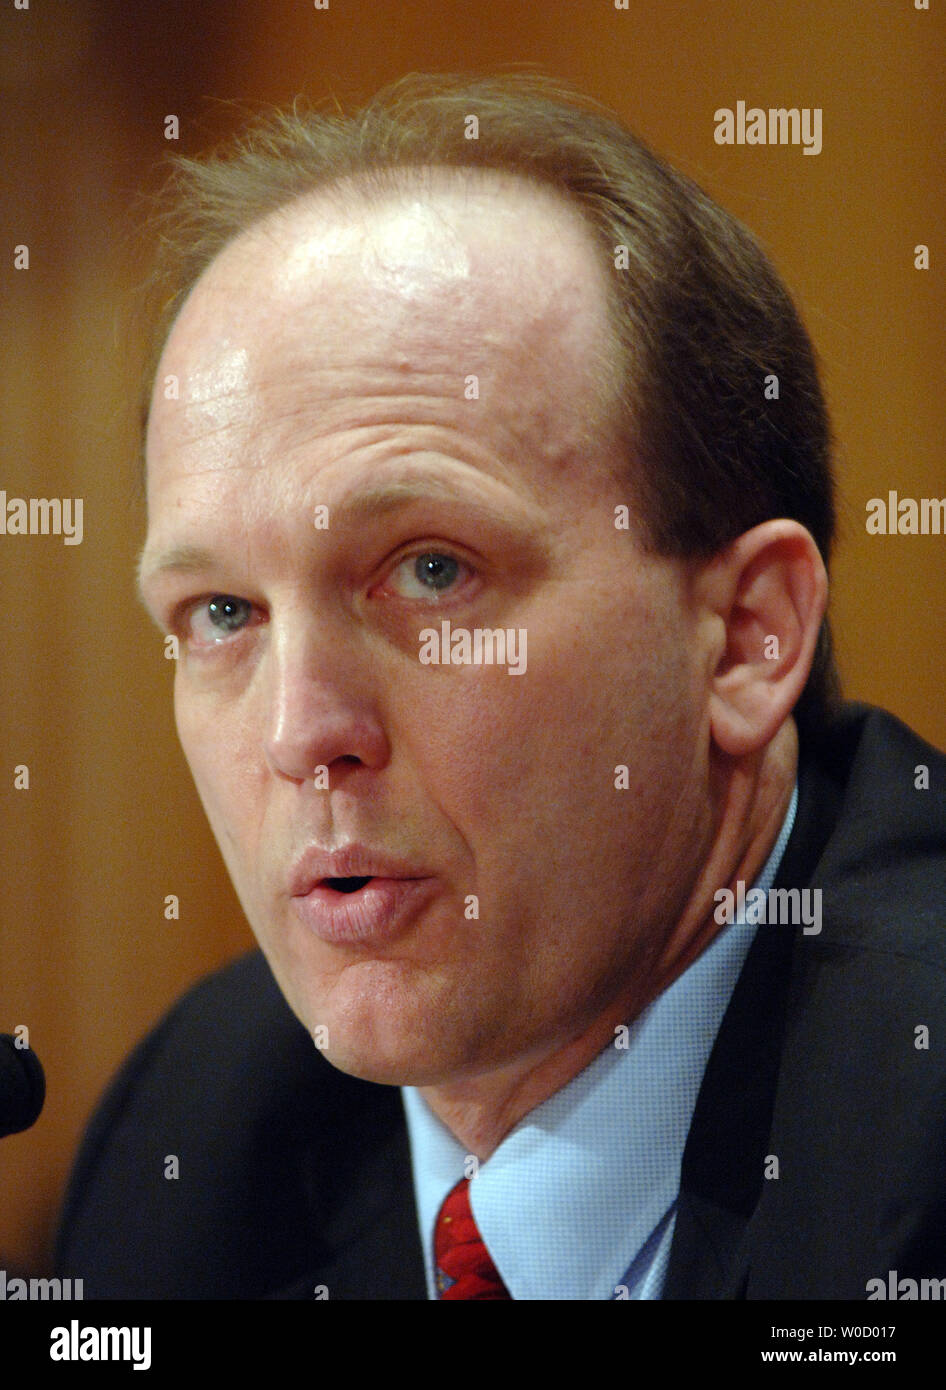 Gregory Kutz, managing director of forensic audits and special investigations, Government Accountability Office, testifies before the Senate Homeland Security and Governmental Affairs Committee about the waste and fraud generated in the aftermath of Hurricane Katrinta during a hearing on Capitol Hill in Washington on February 13, 2006. Witnesses described millions of dollars in fraudulent emergency payments and waste generated by poor oversight and planning by FEMA.   (UPI Photo/Roger L. Wollenberg) Stock Photo